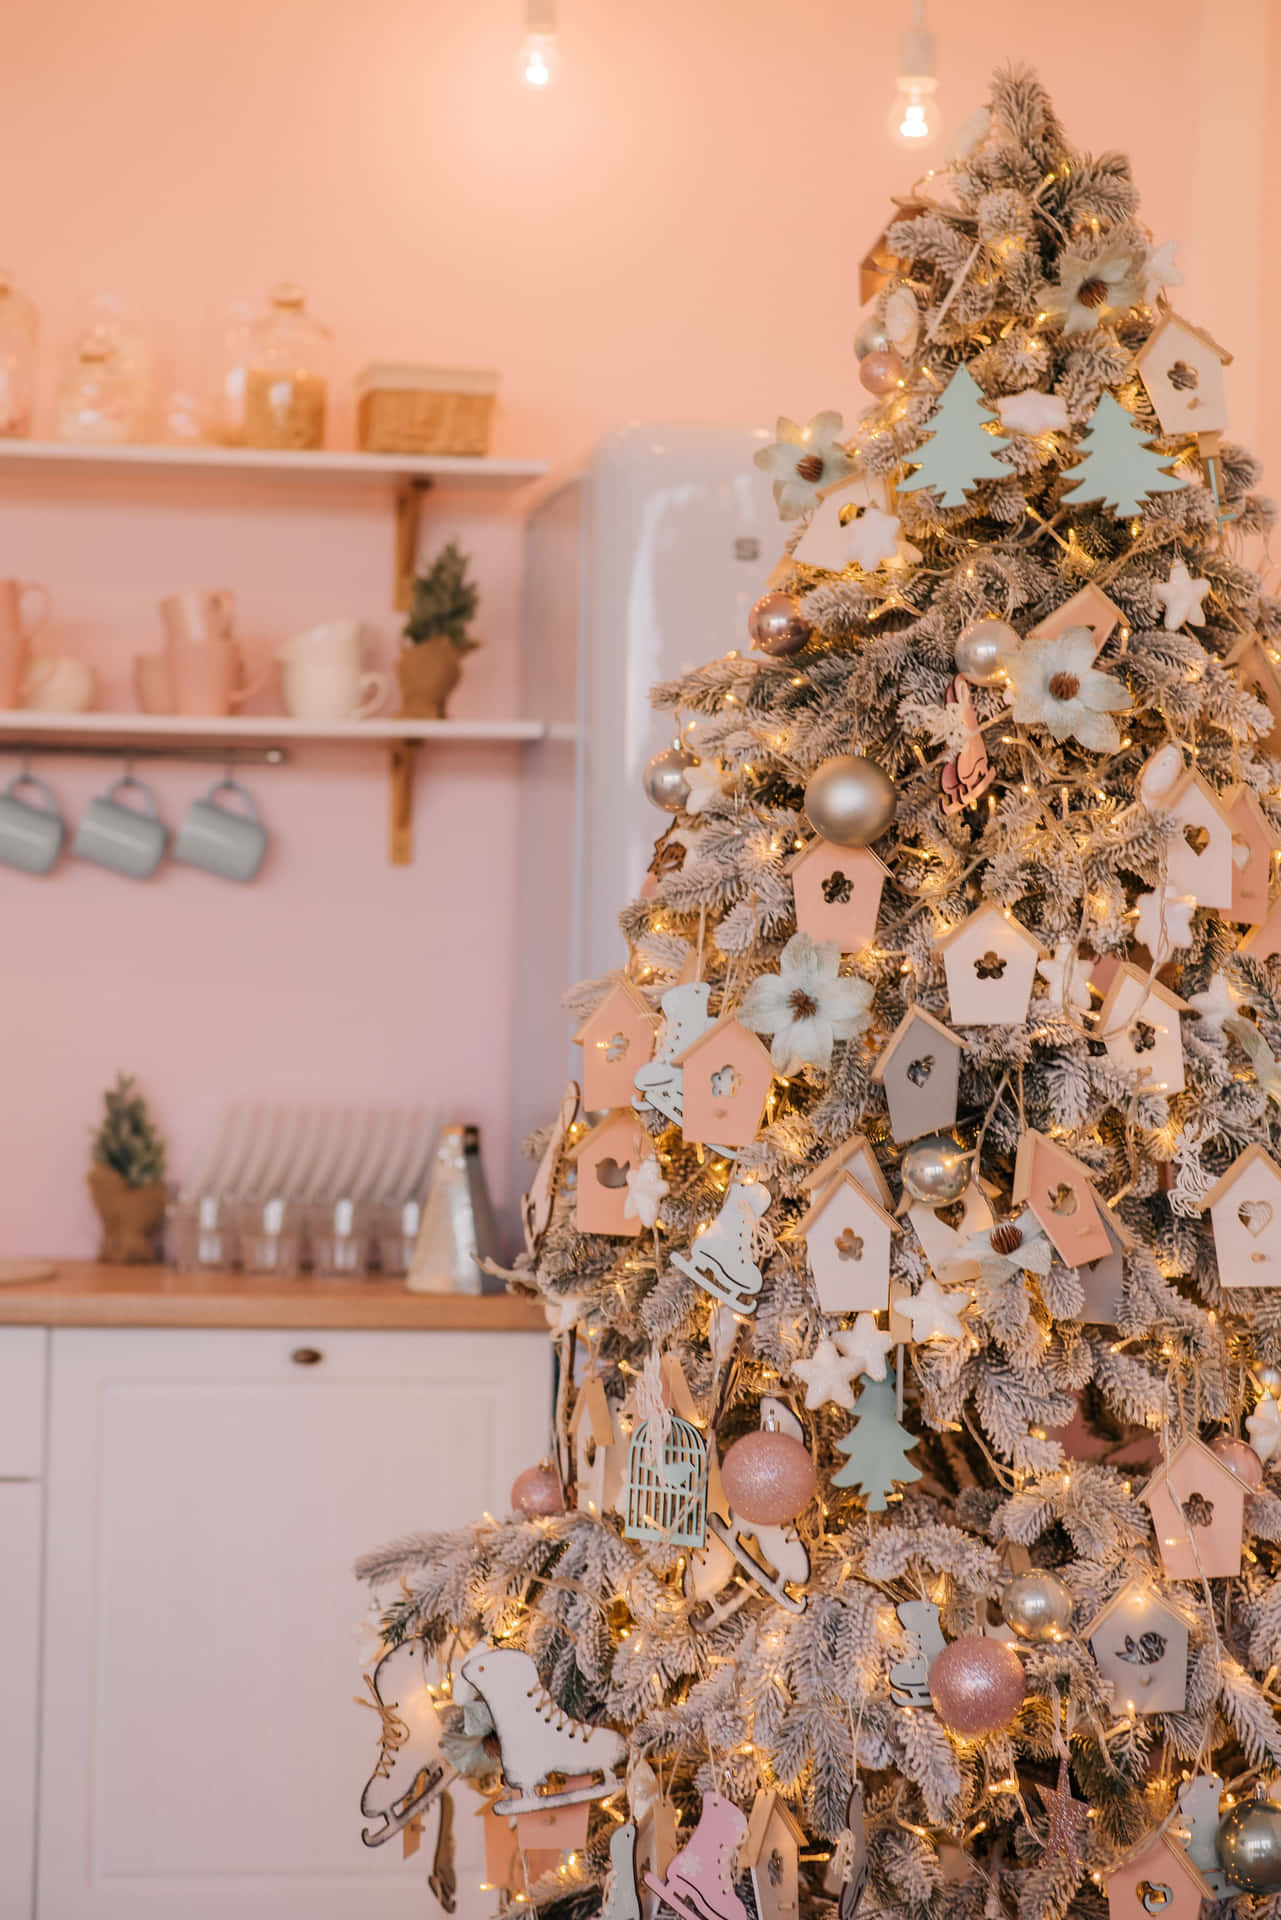 A cozy aesthetic Christmas tree adorned with ornaments, candy canes and rustic decorations. Wallpaper